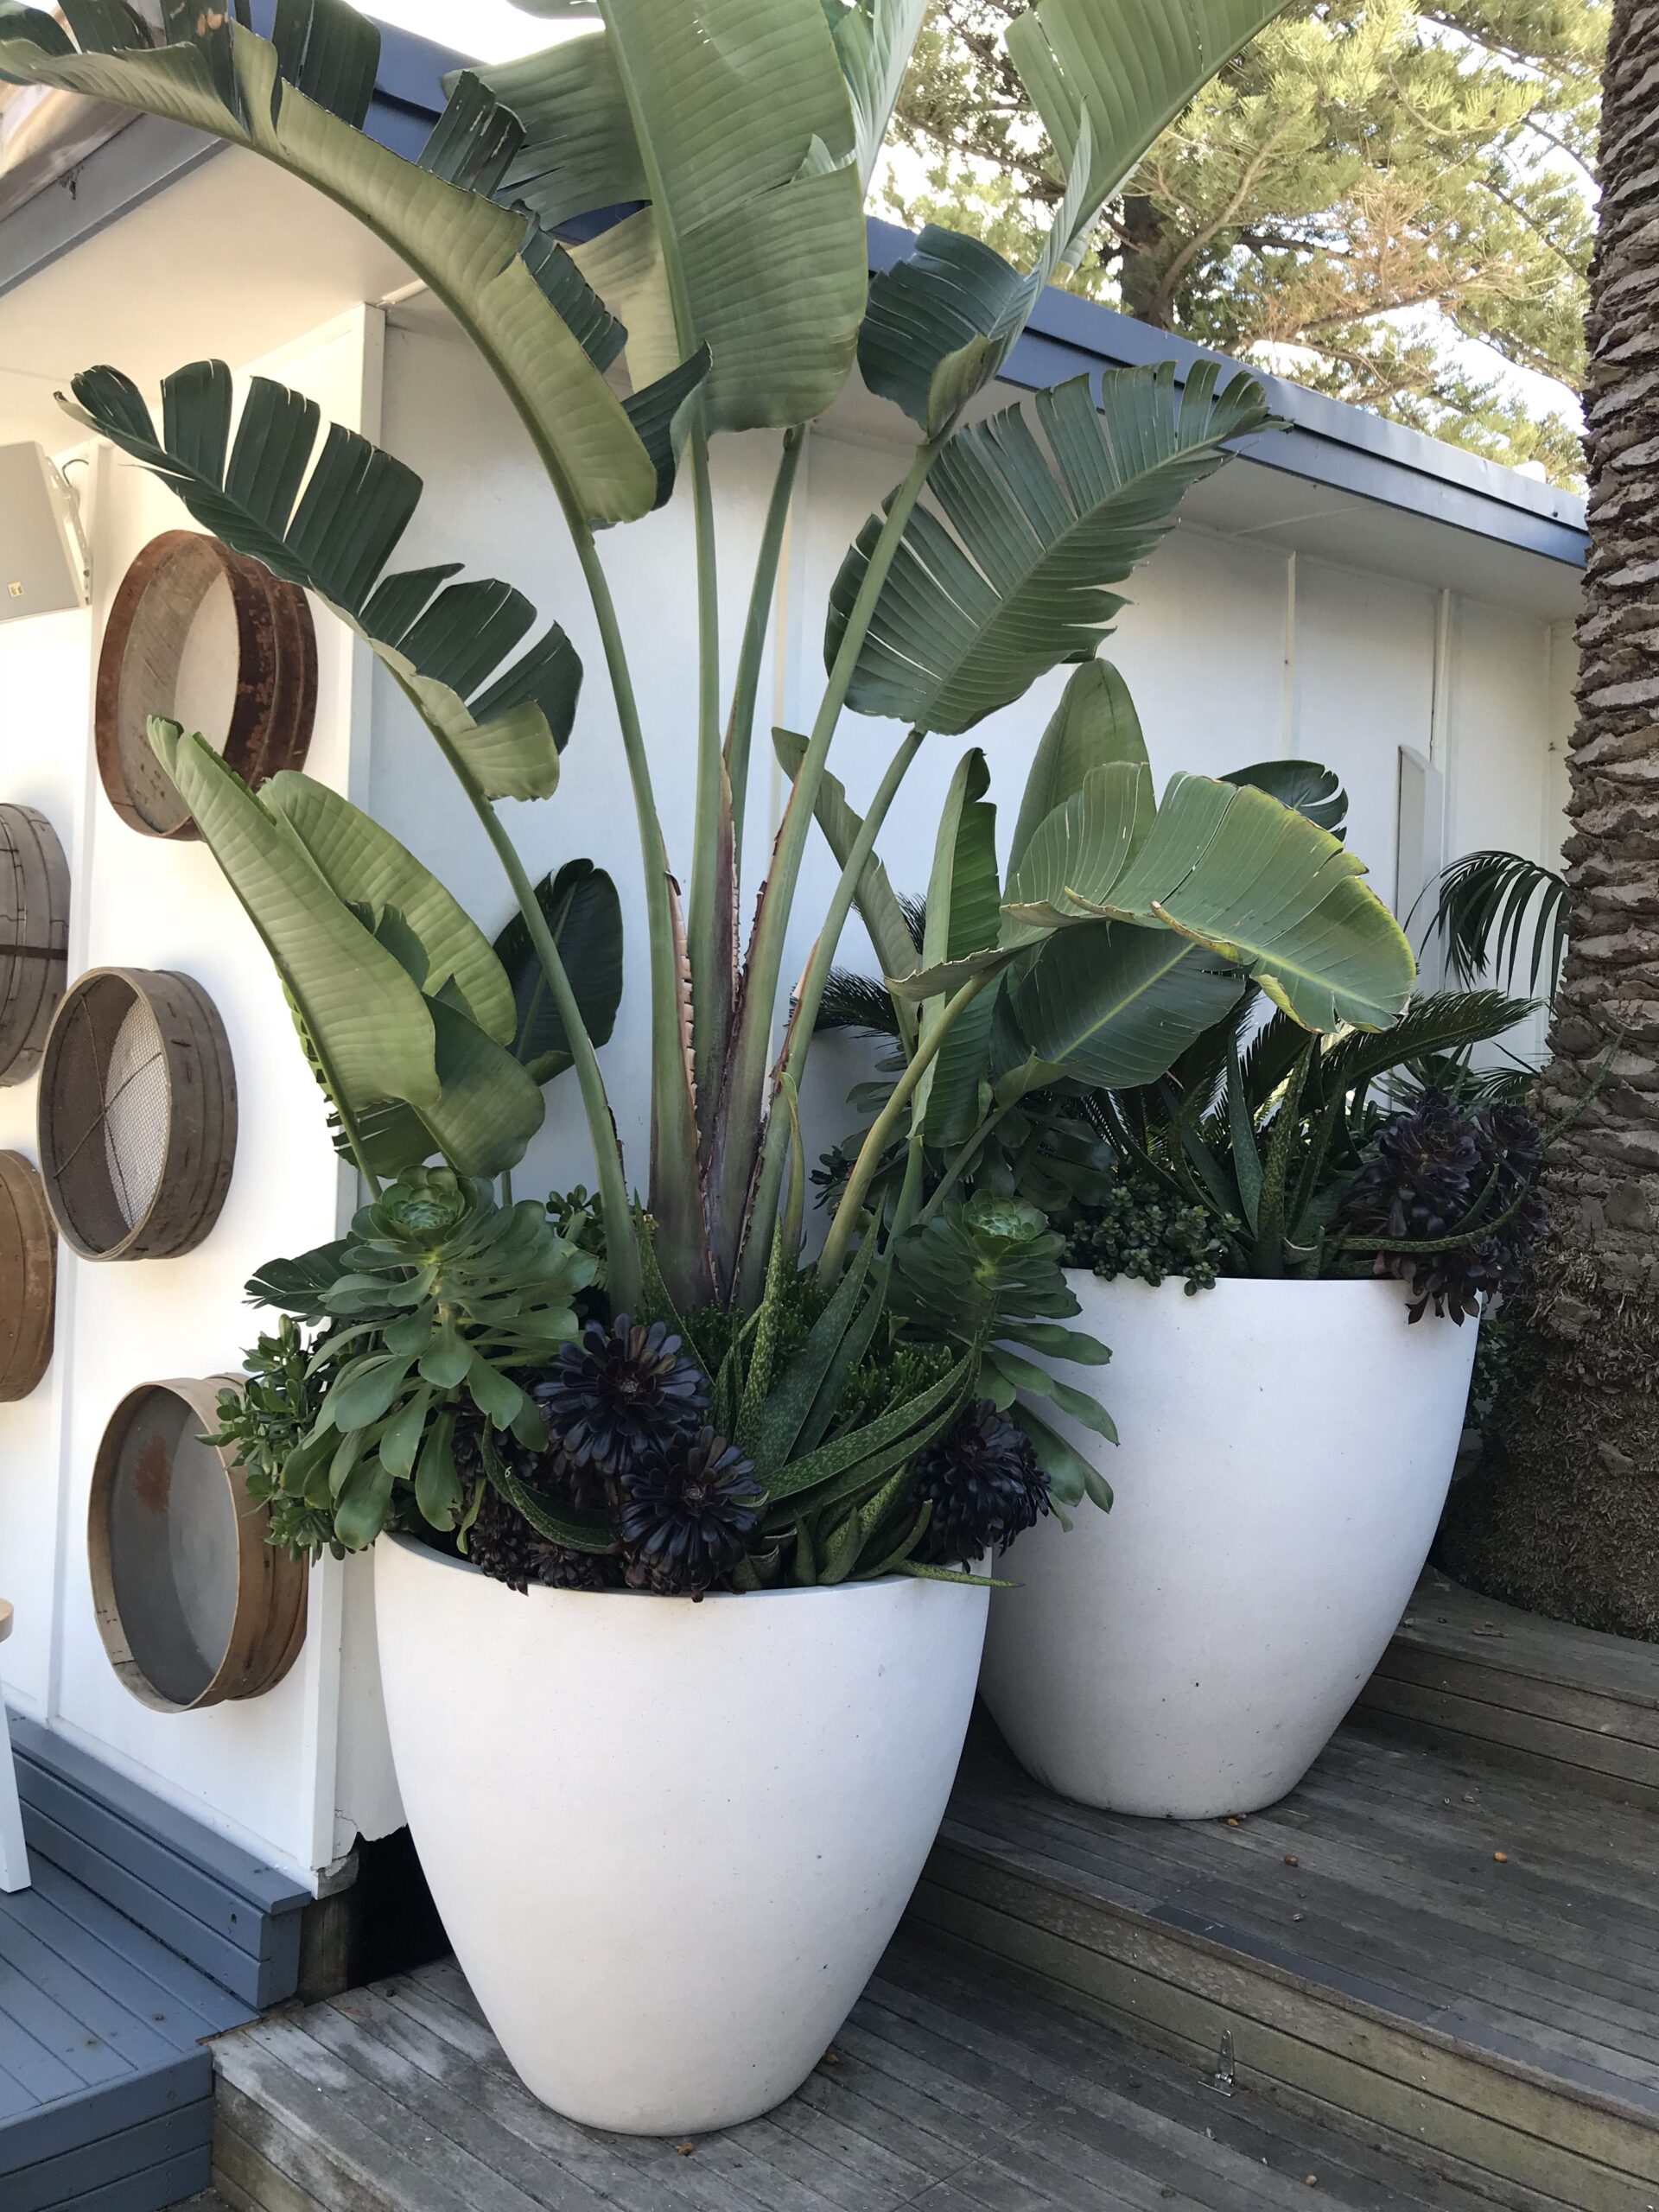 Transform Your Outdoor Space with Large
Garden Pots